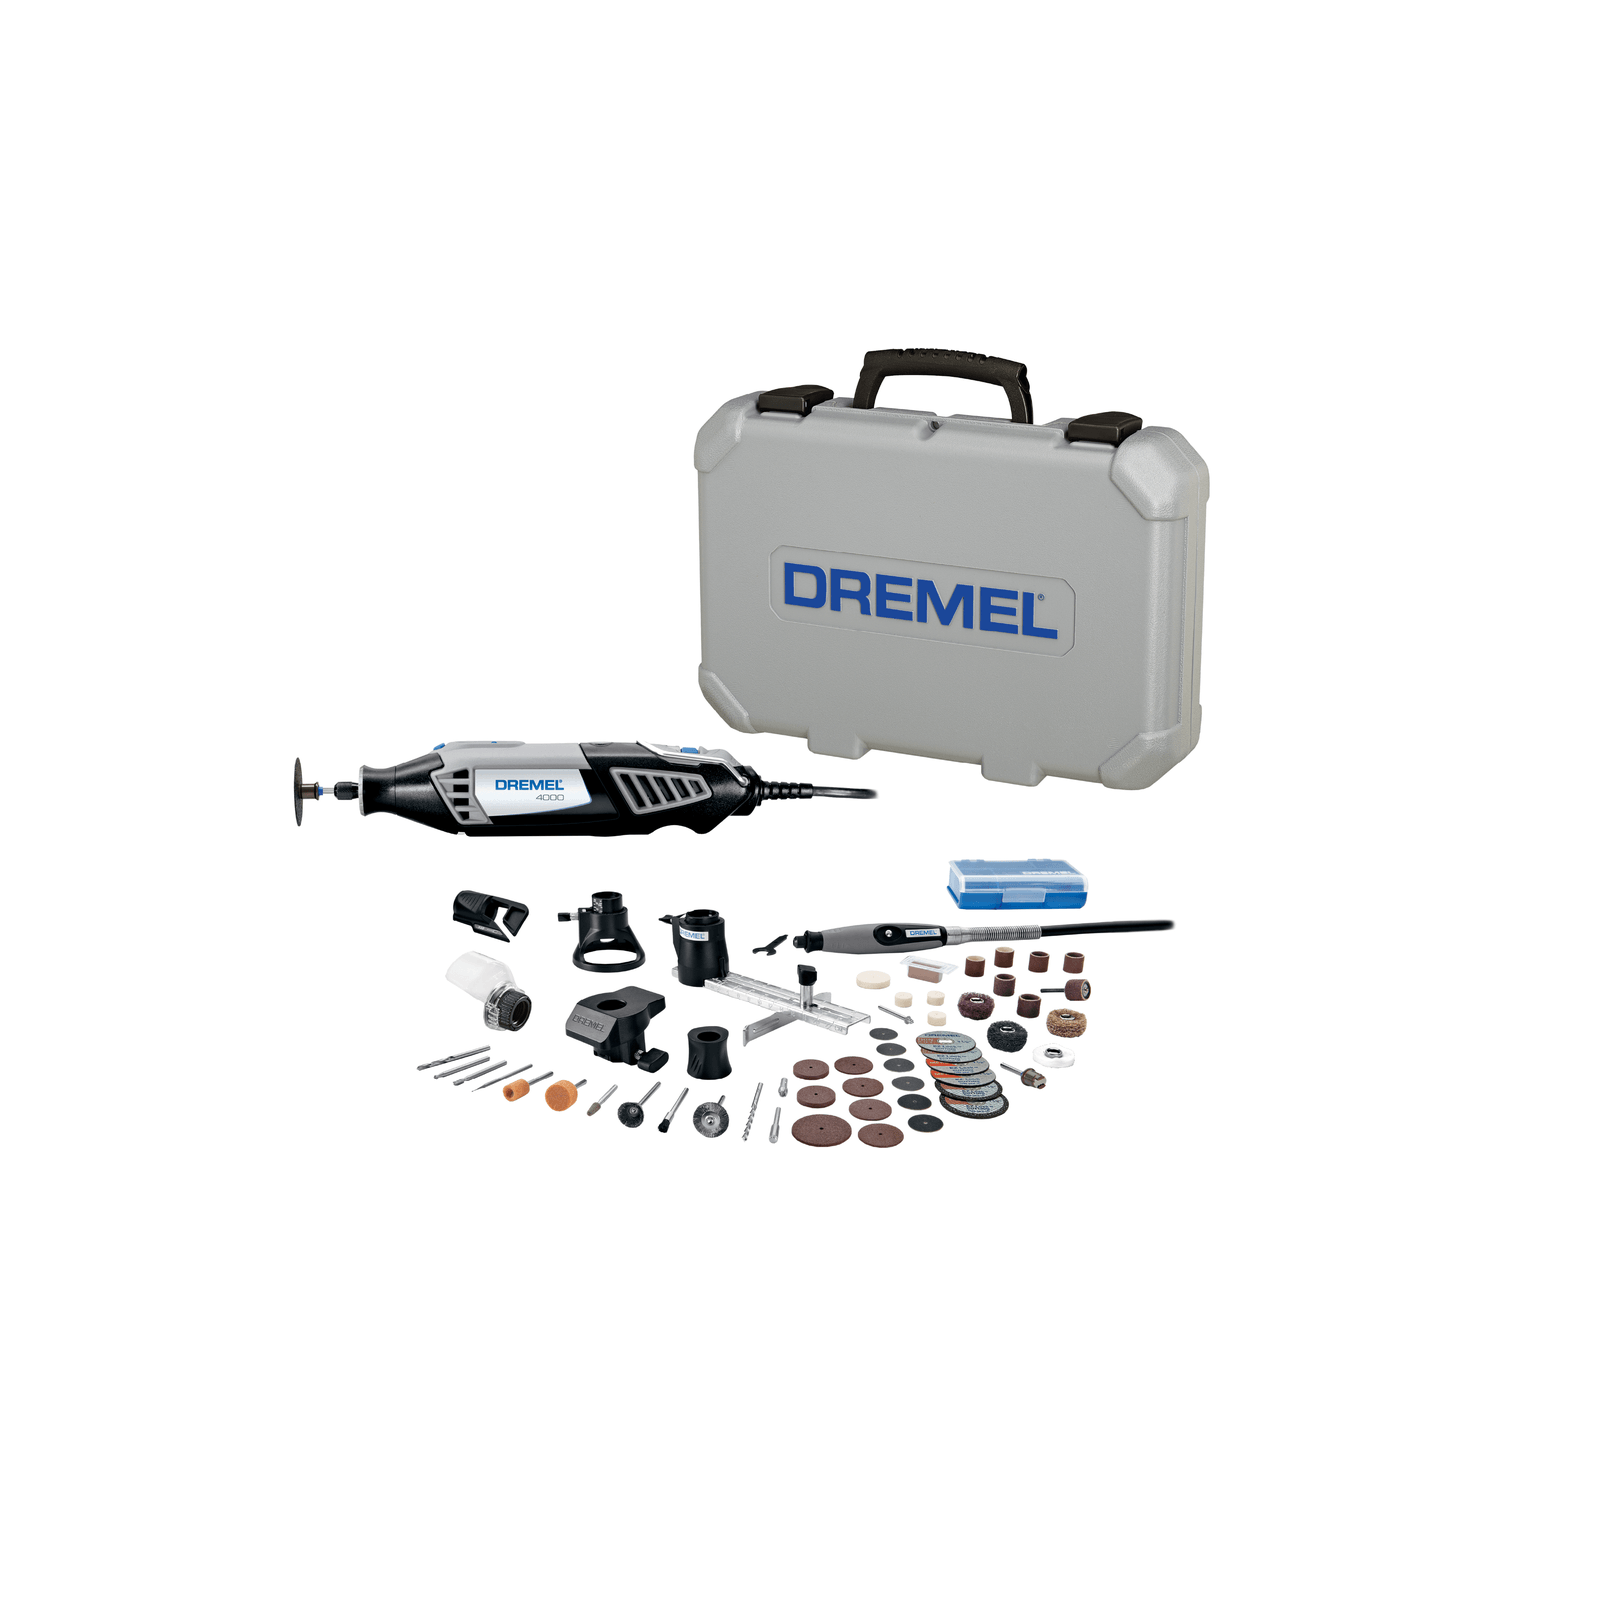 Dremel 4000-6/50 Rotary Tool Kit with Attachments, Accessories